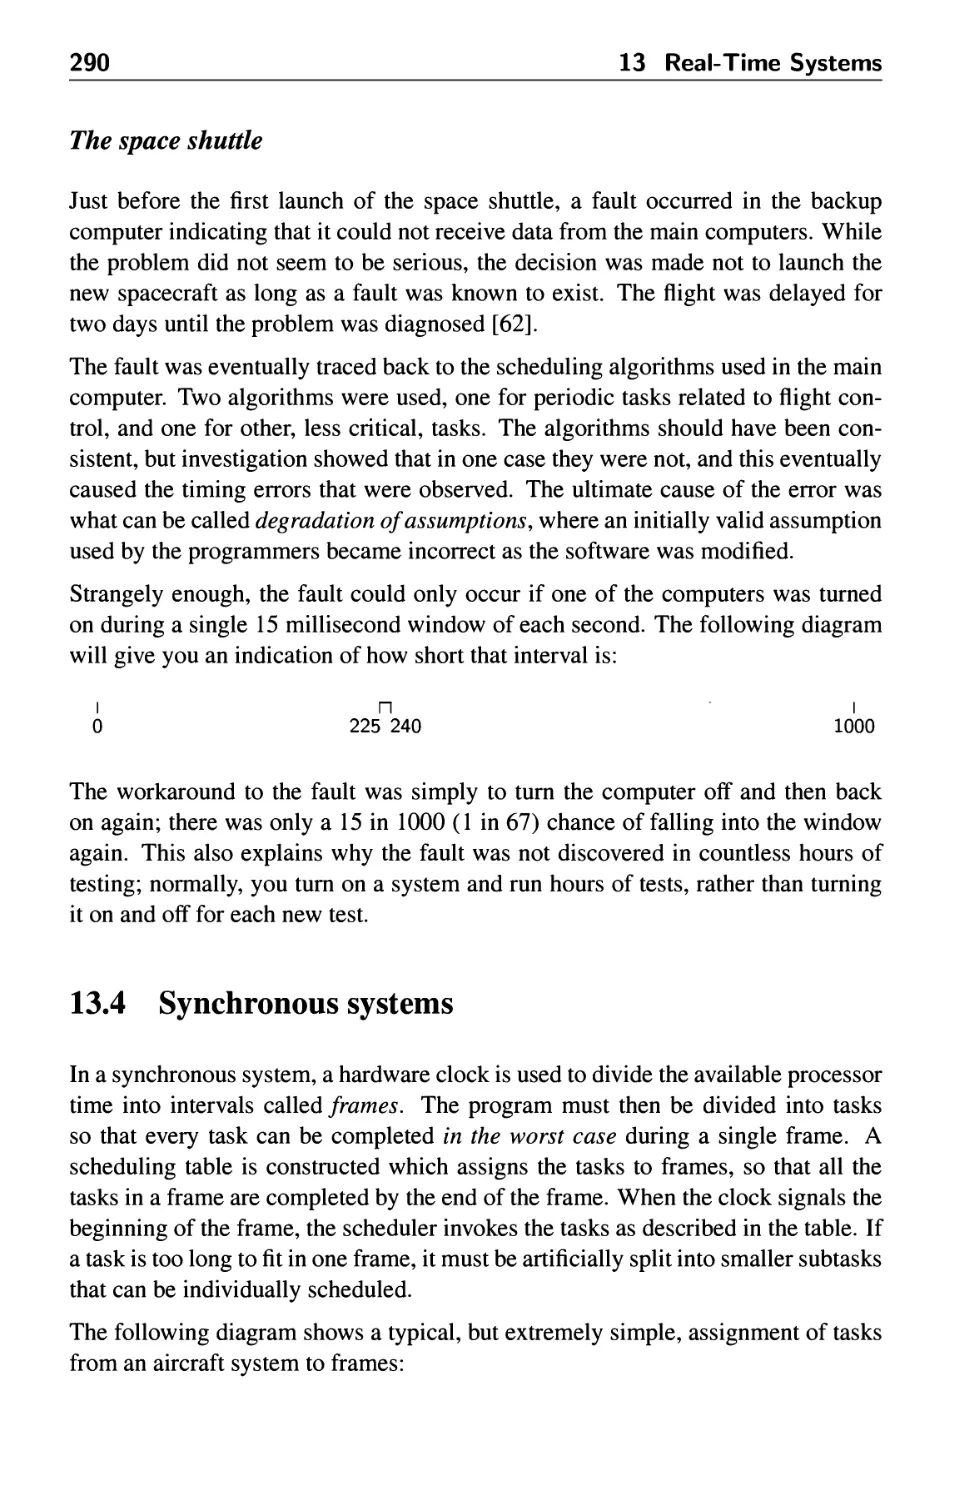 13.4 Synchronous systems